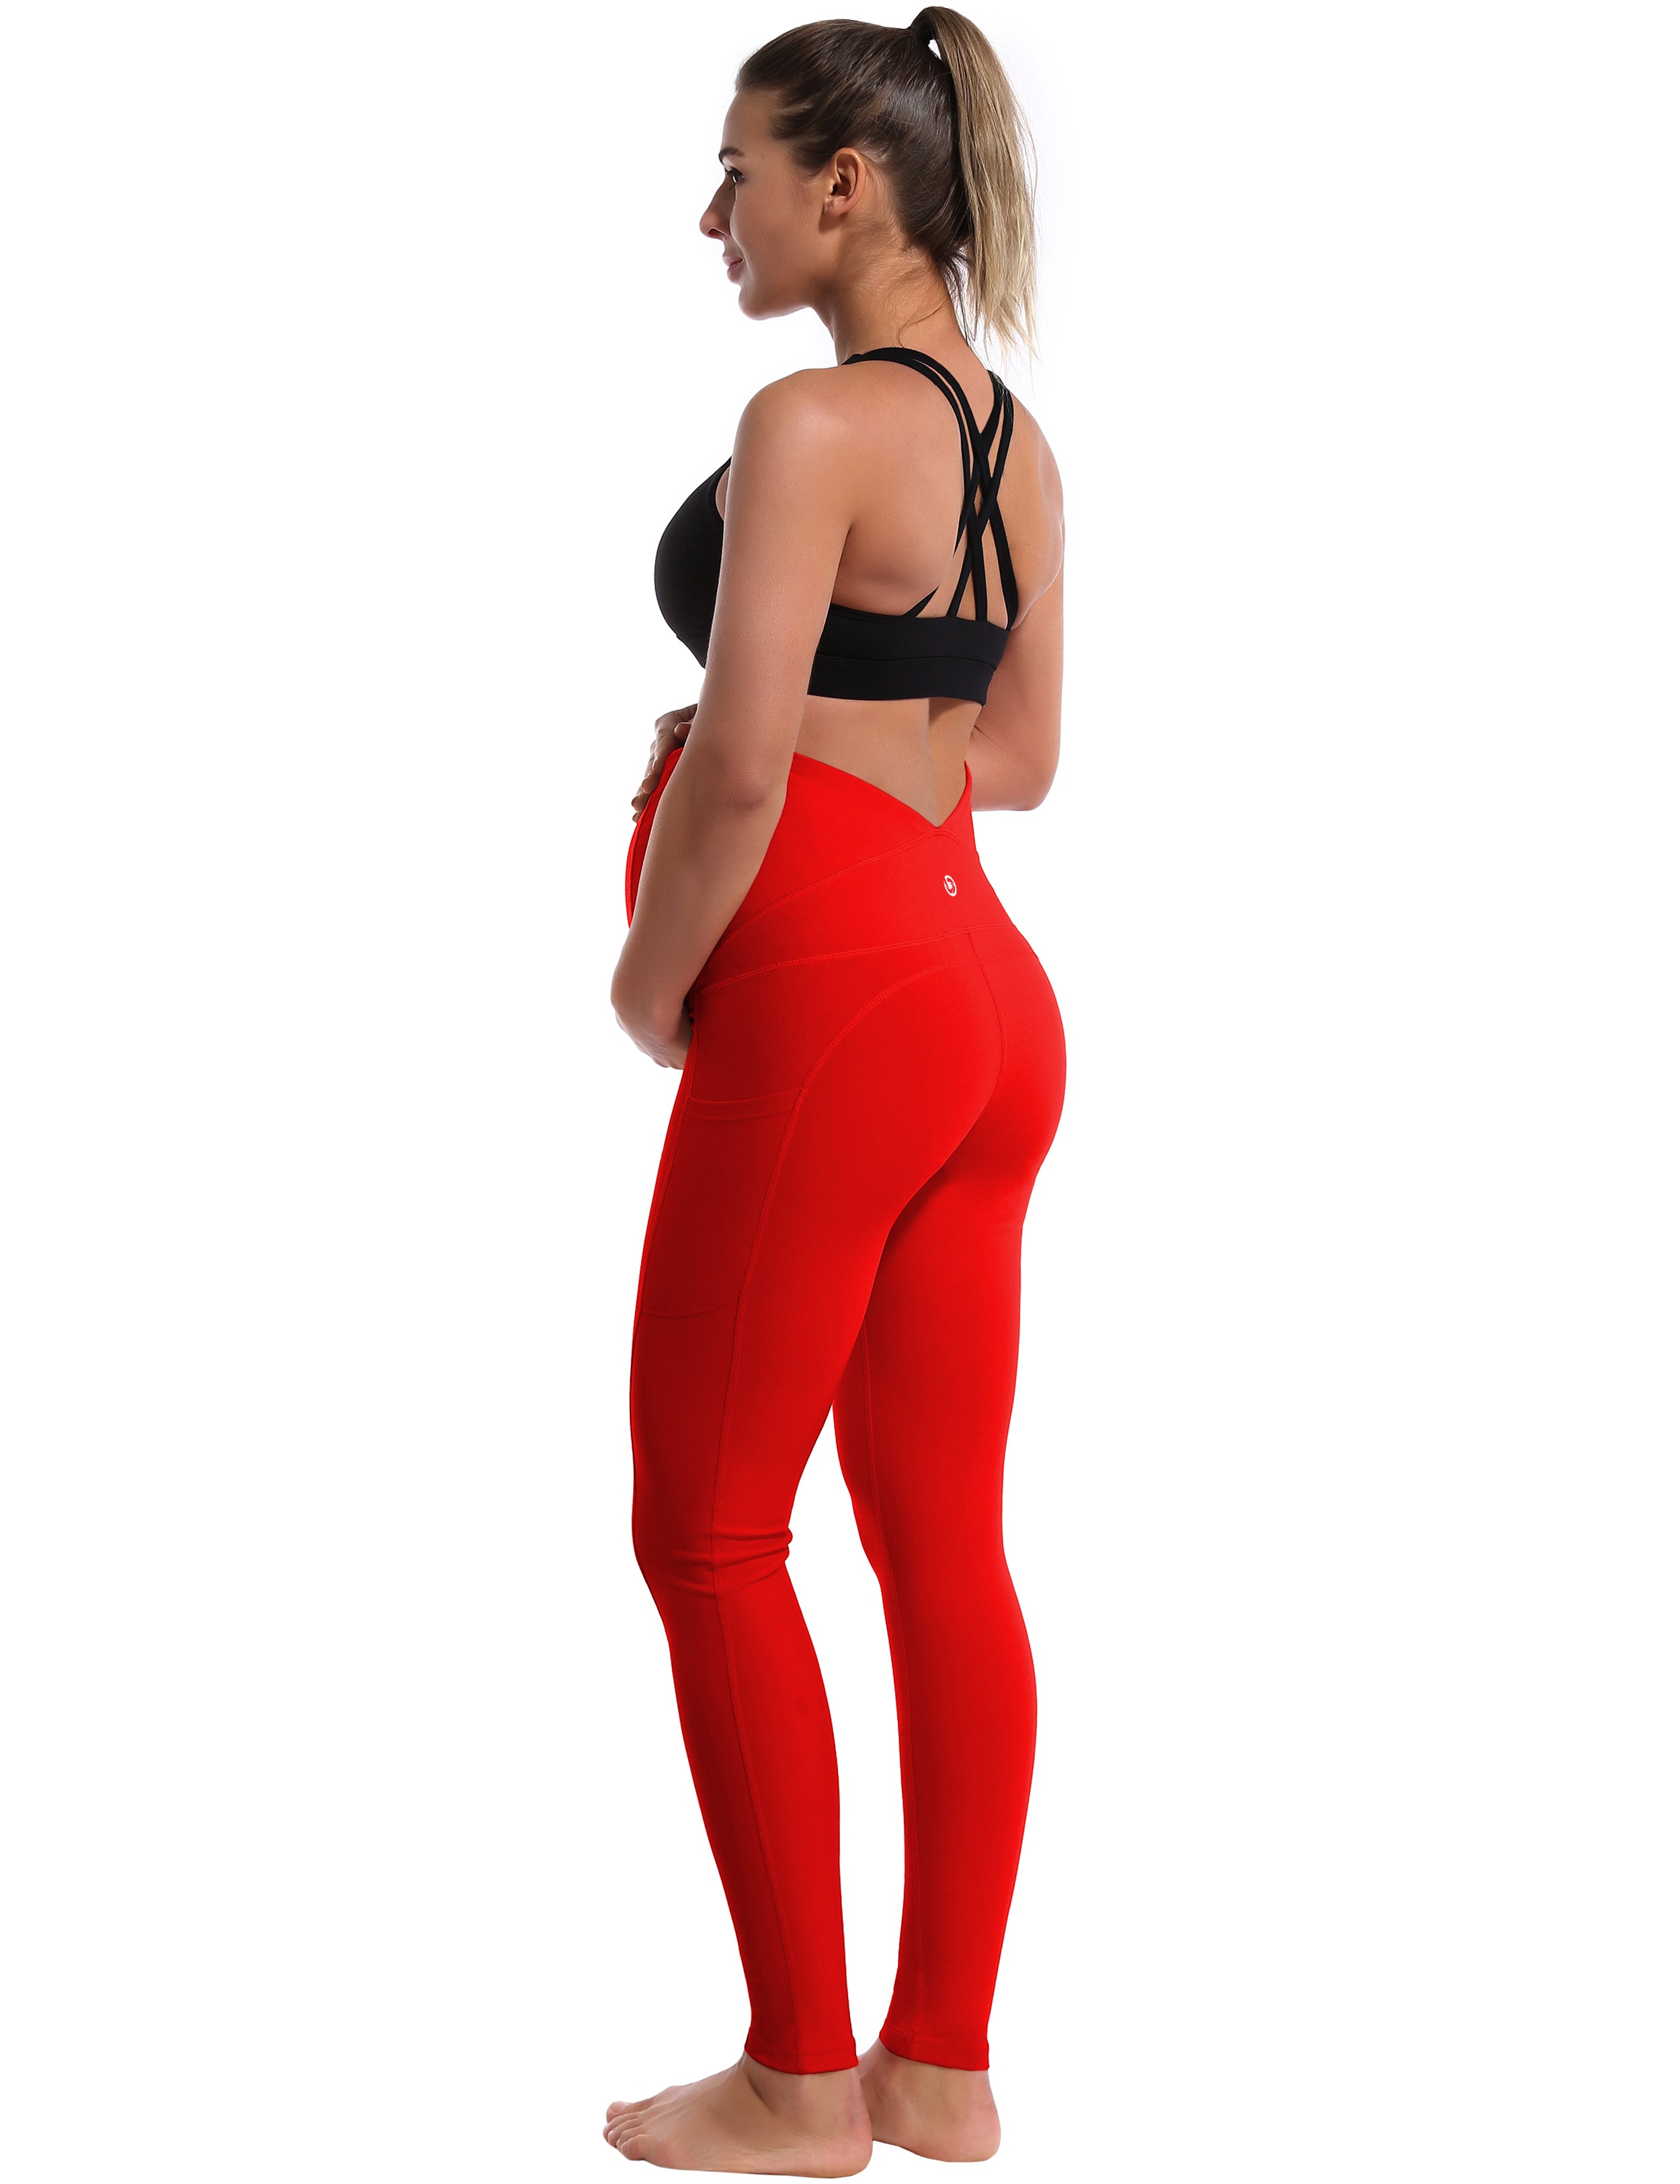 26" Side Pockets Maternity Yoga Pants scarlet 87%Nylon/13%Spandex Softest-ever fabric High elasticity 4-way stretch Fabric doesn't attract lint easily No see-through Moisture-wicking Machine wash